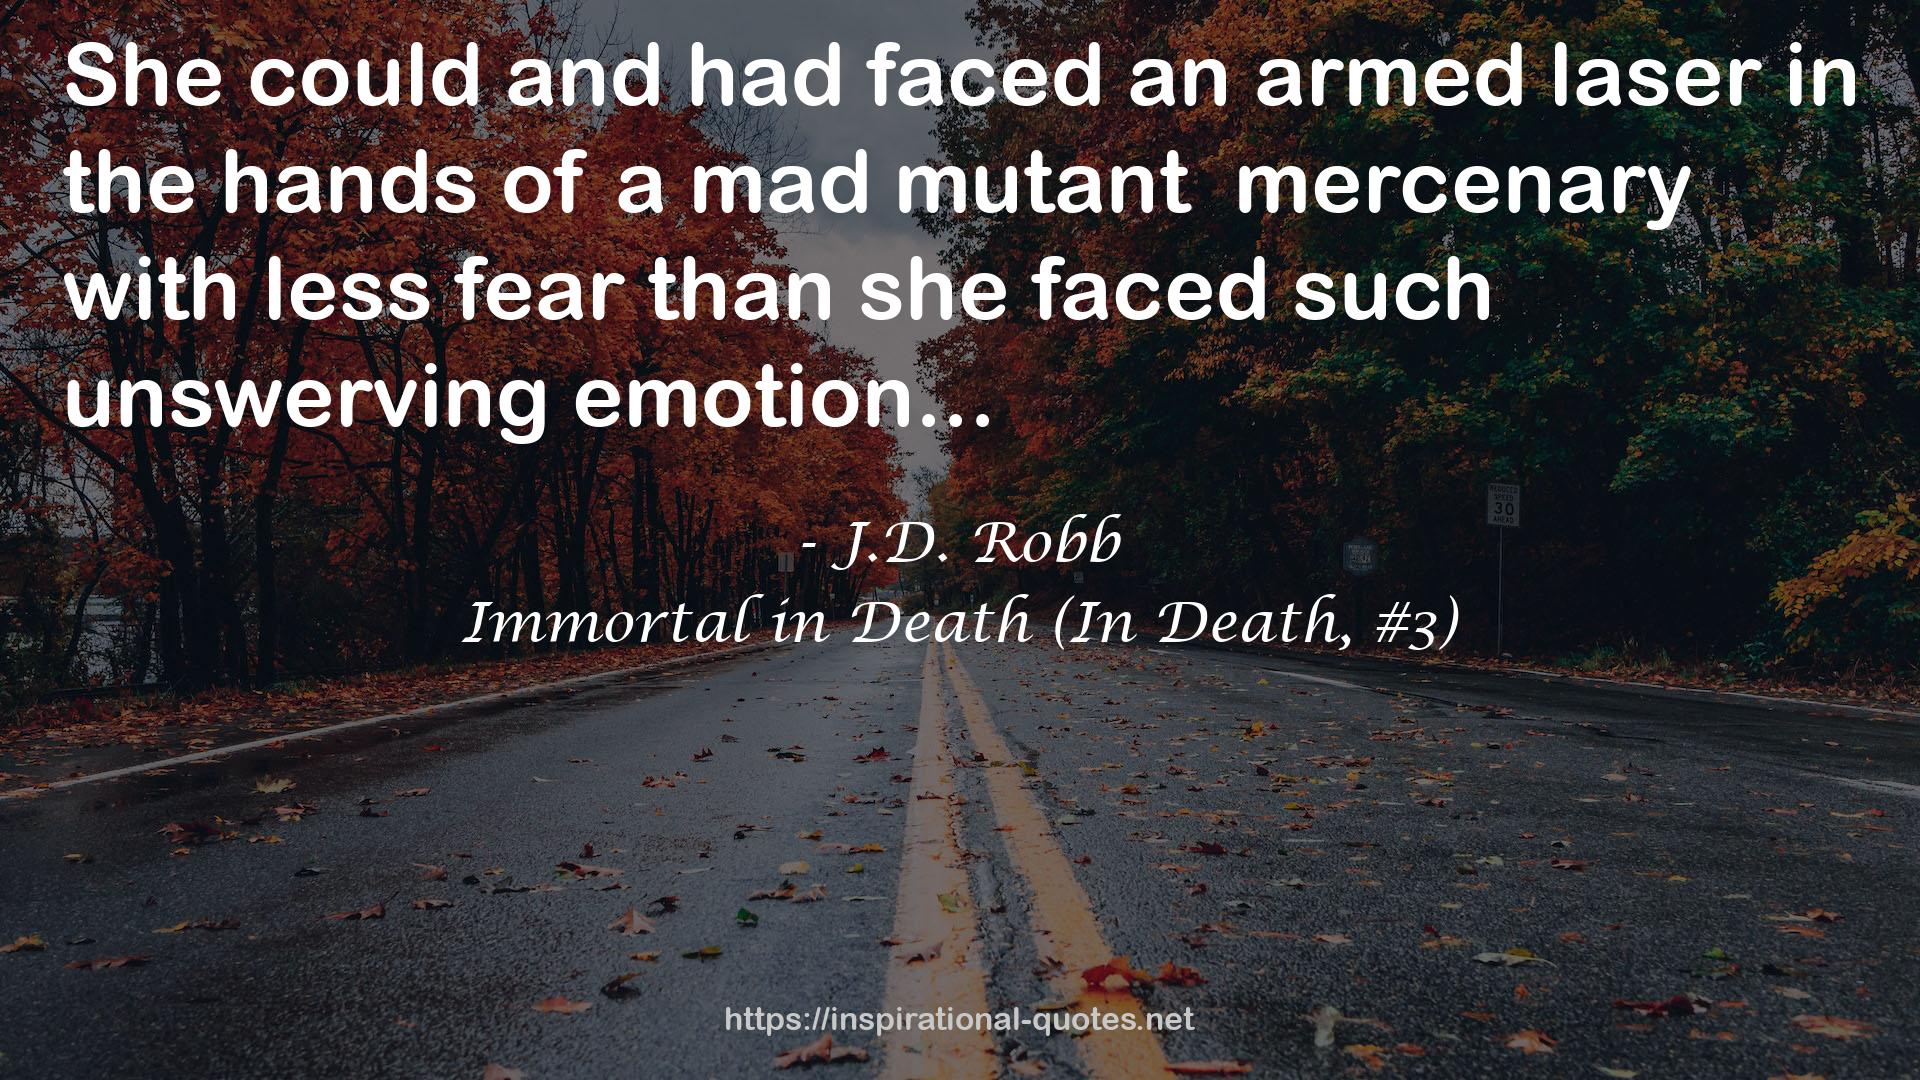 Immortal in Death (In Death, #3) QUOTES